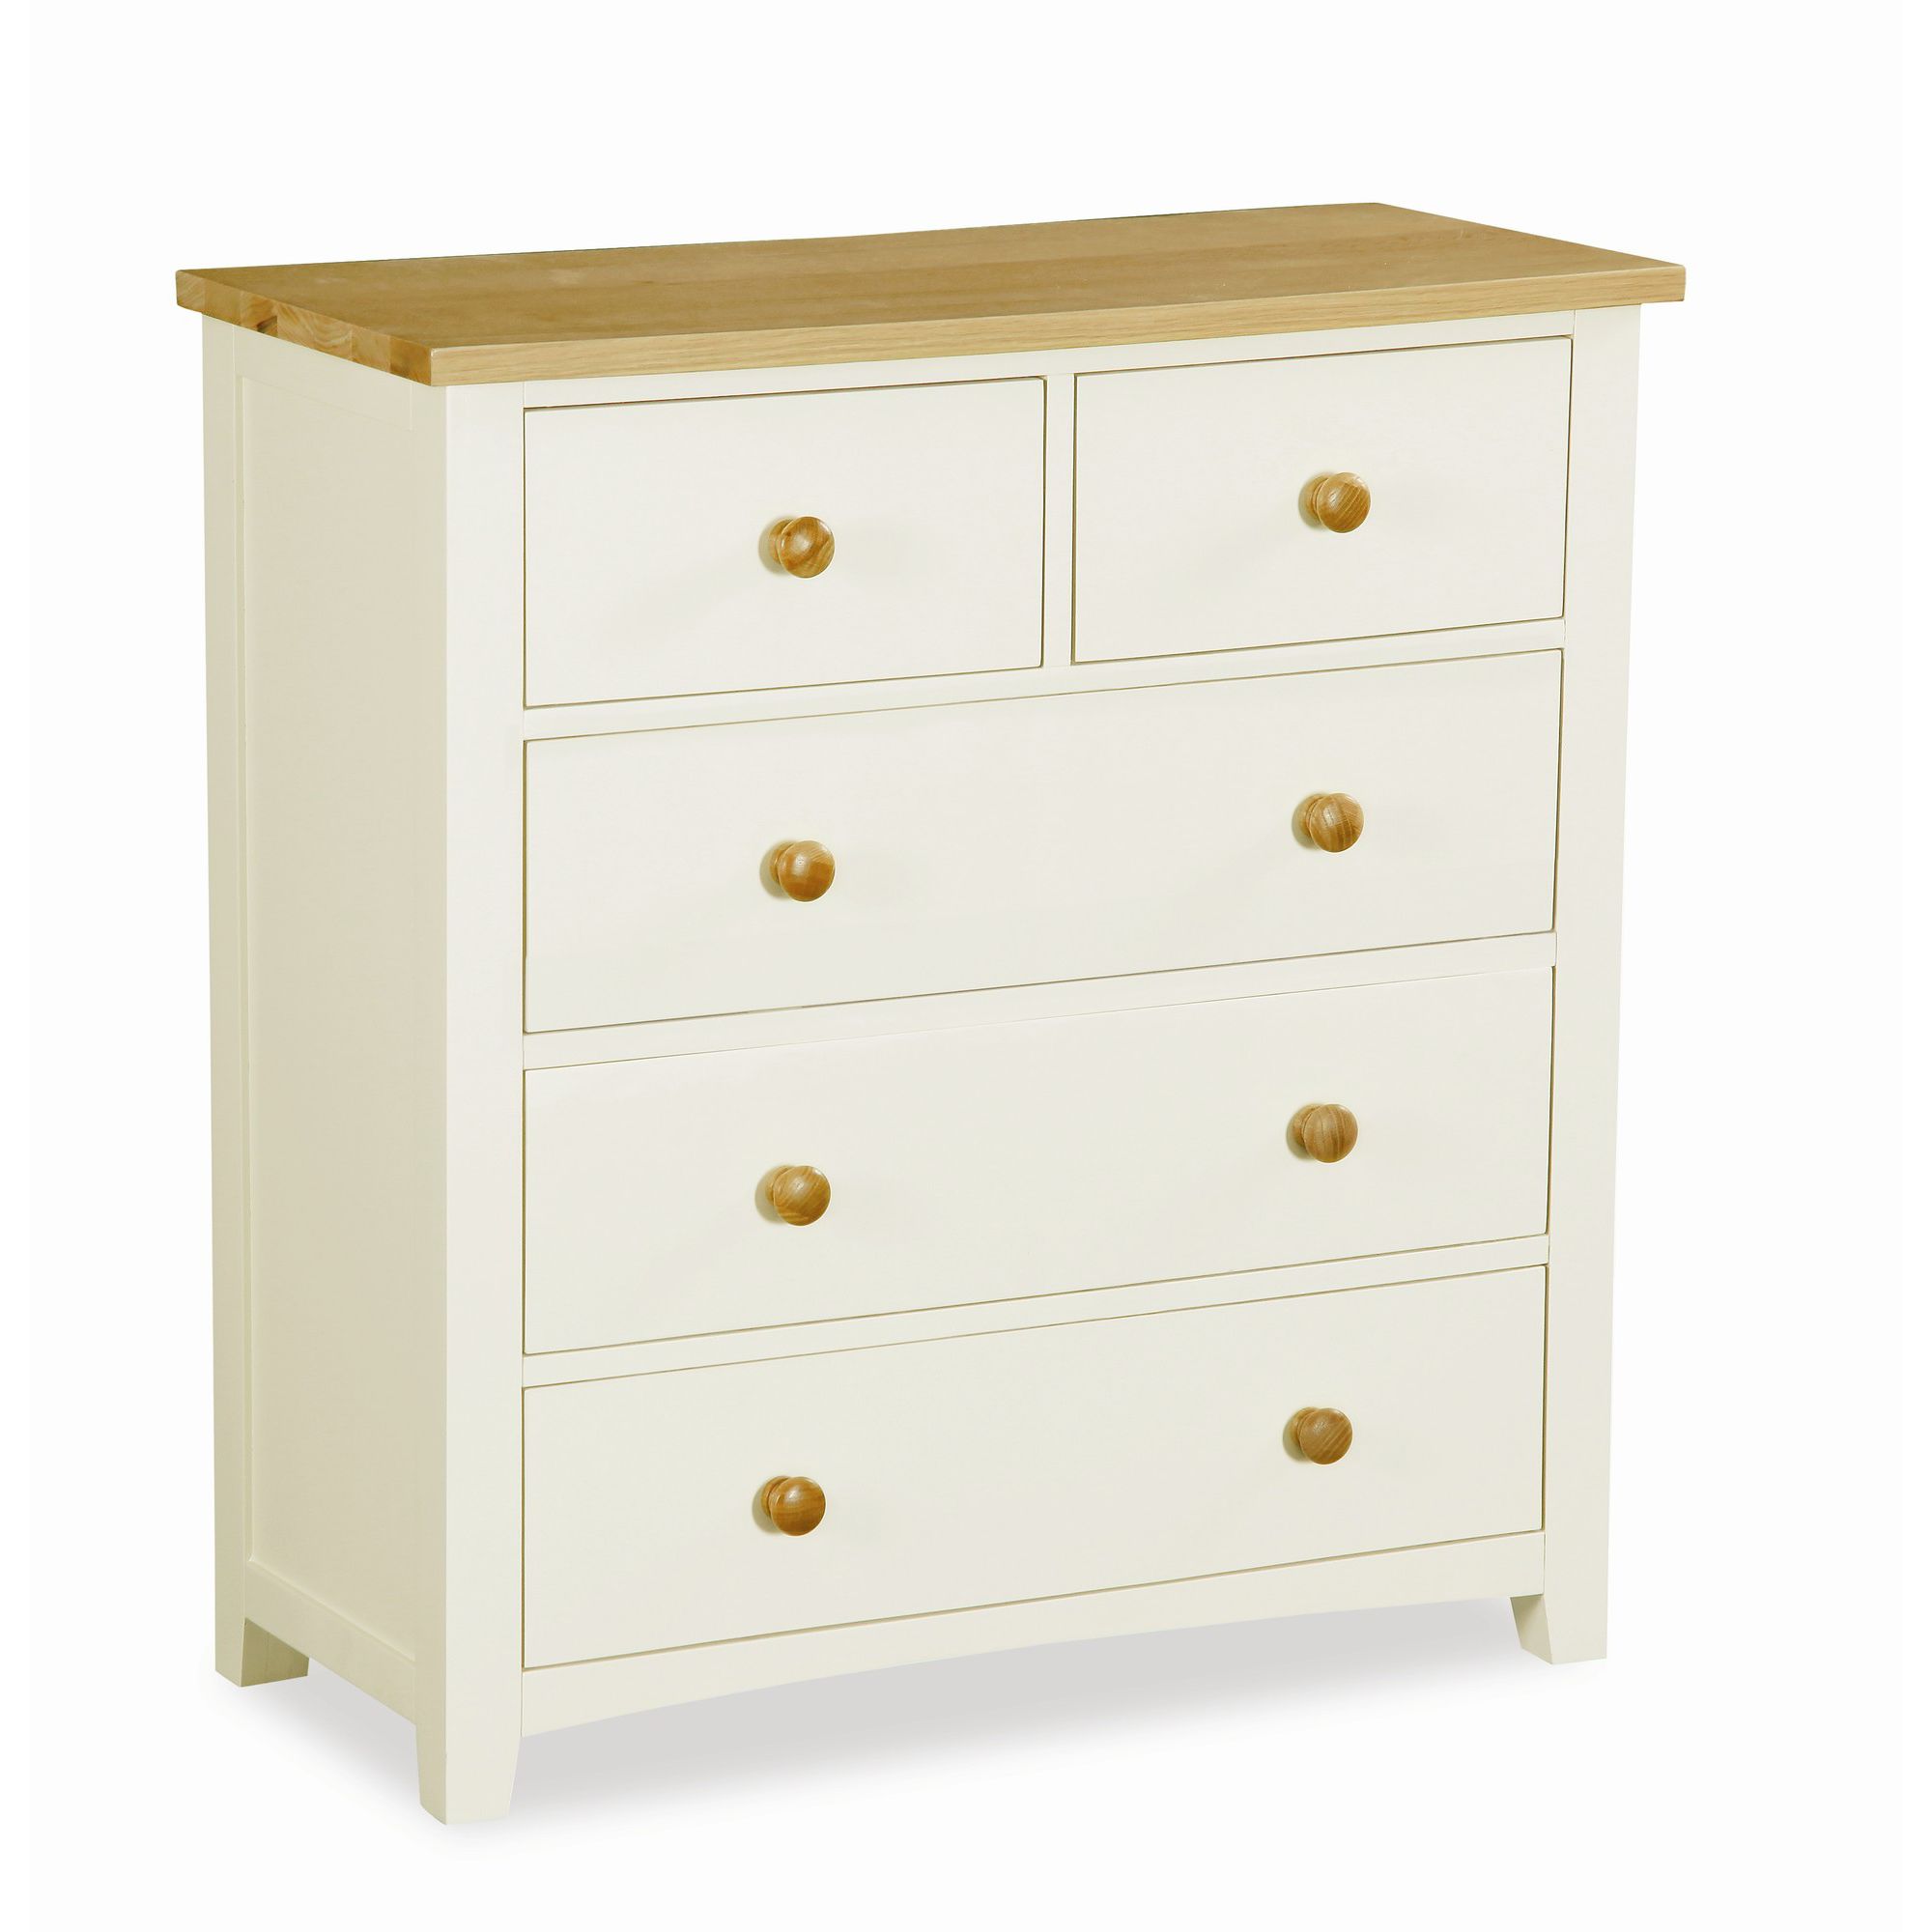 Alterton Furniture St. Ives 2 Over 3 Drawer Chest at Tesco Direct